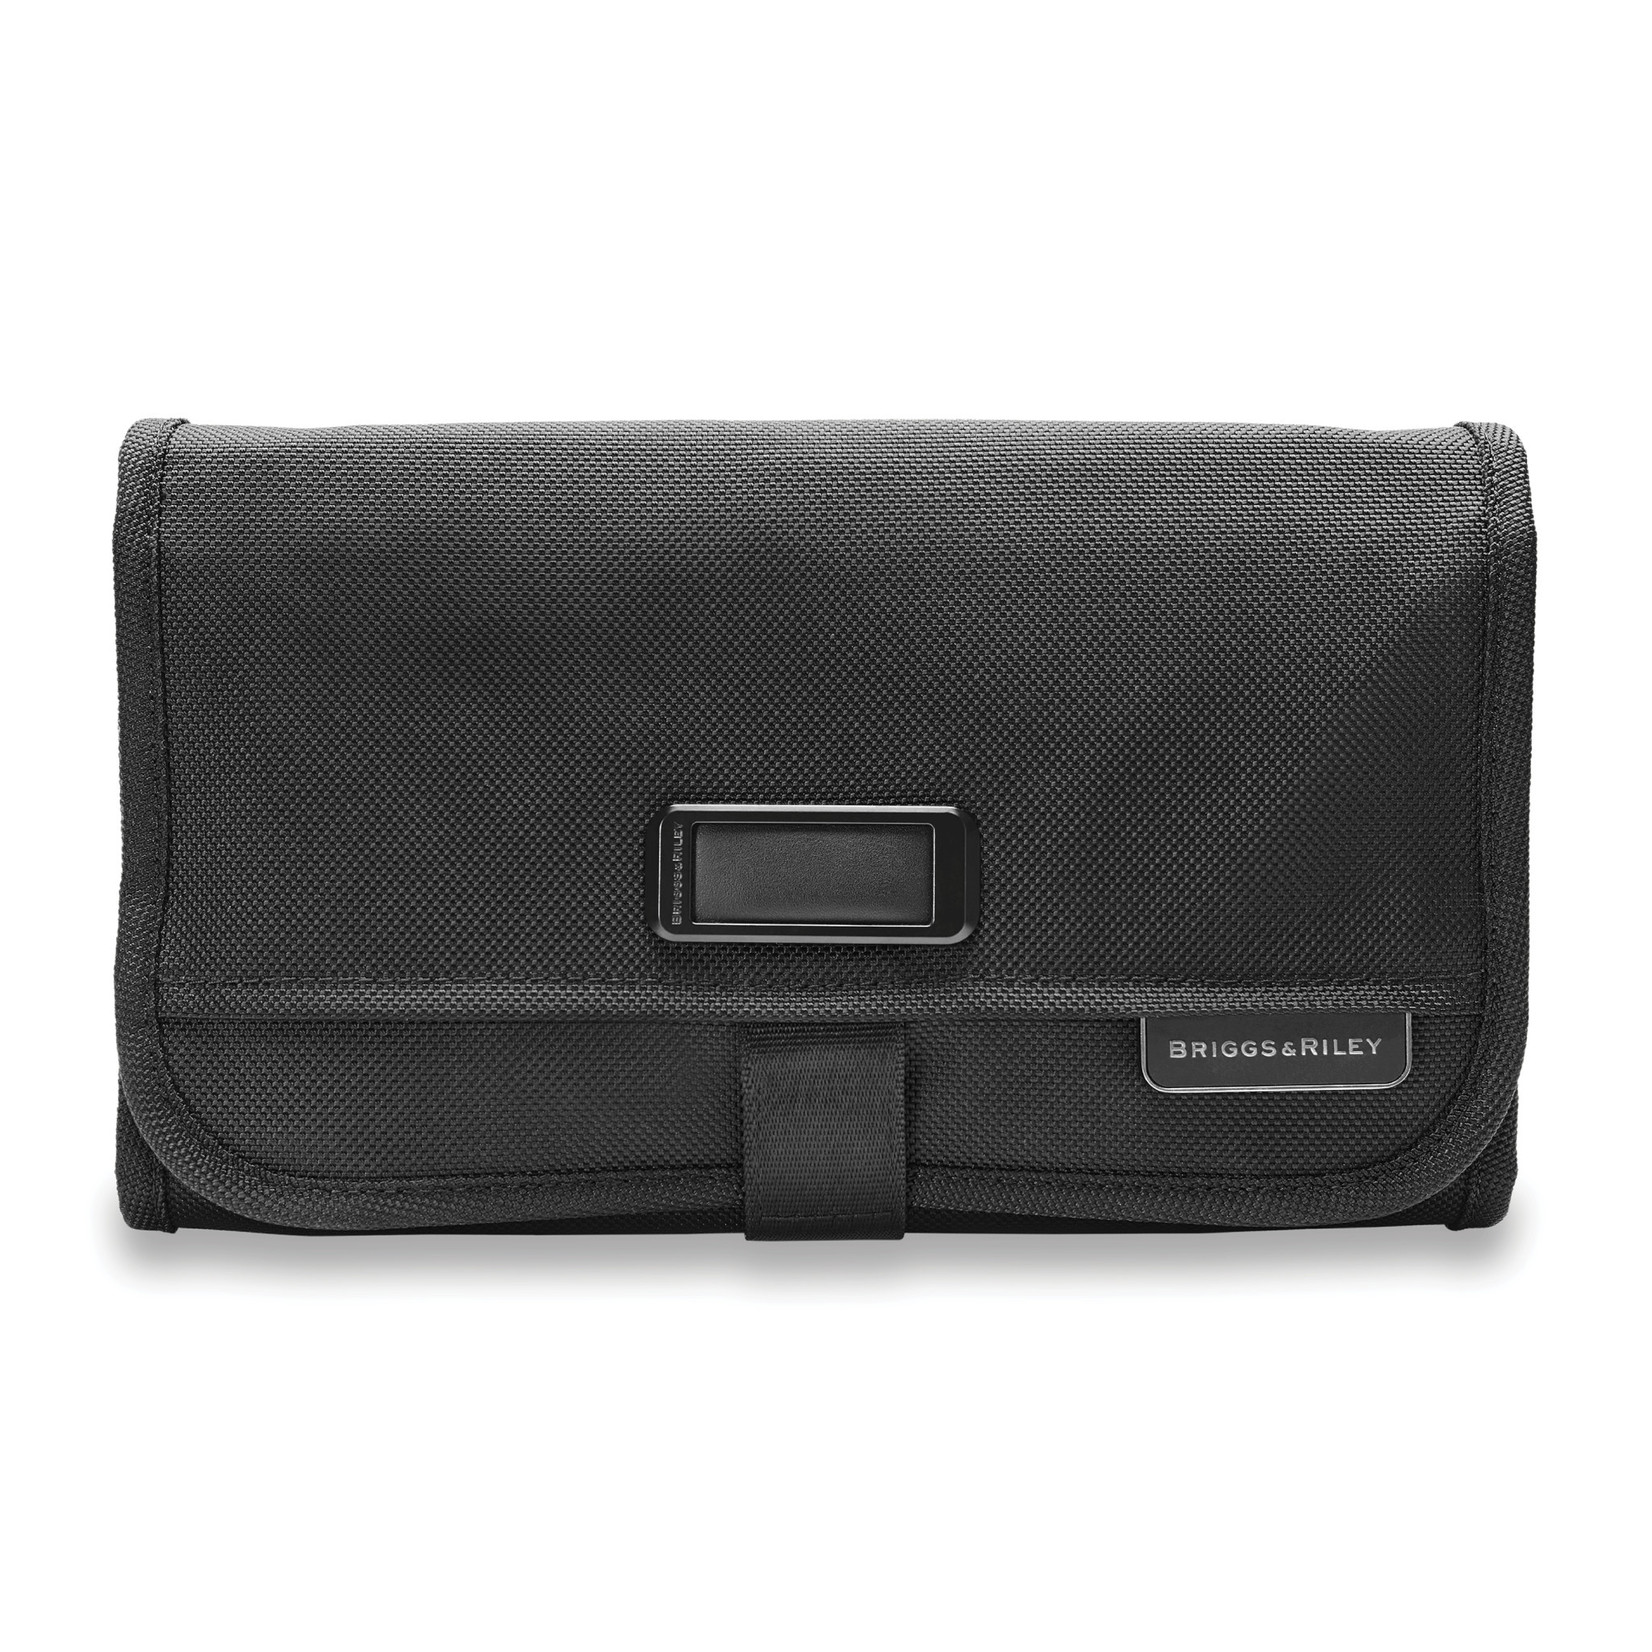 BRIGGS & RILEY BASELINE COMPACT TOILETRY KIT